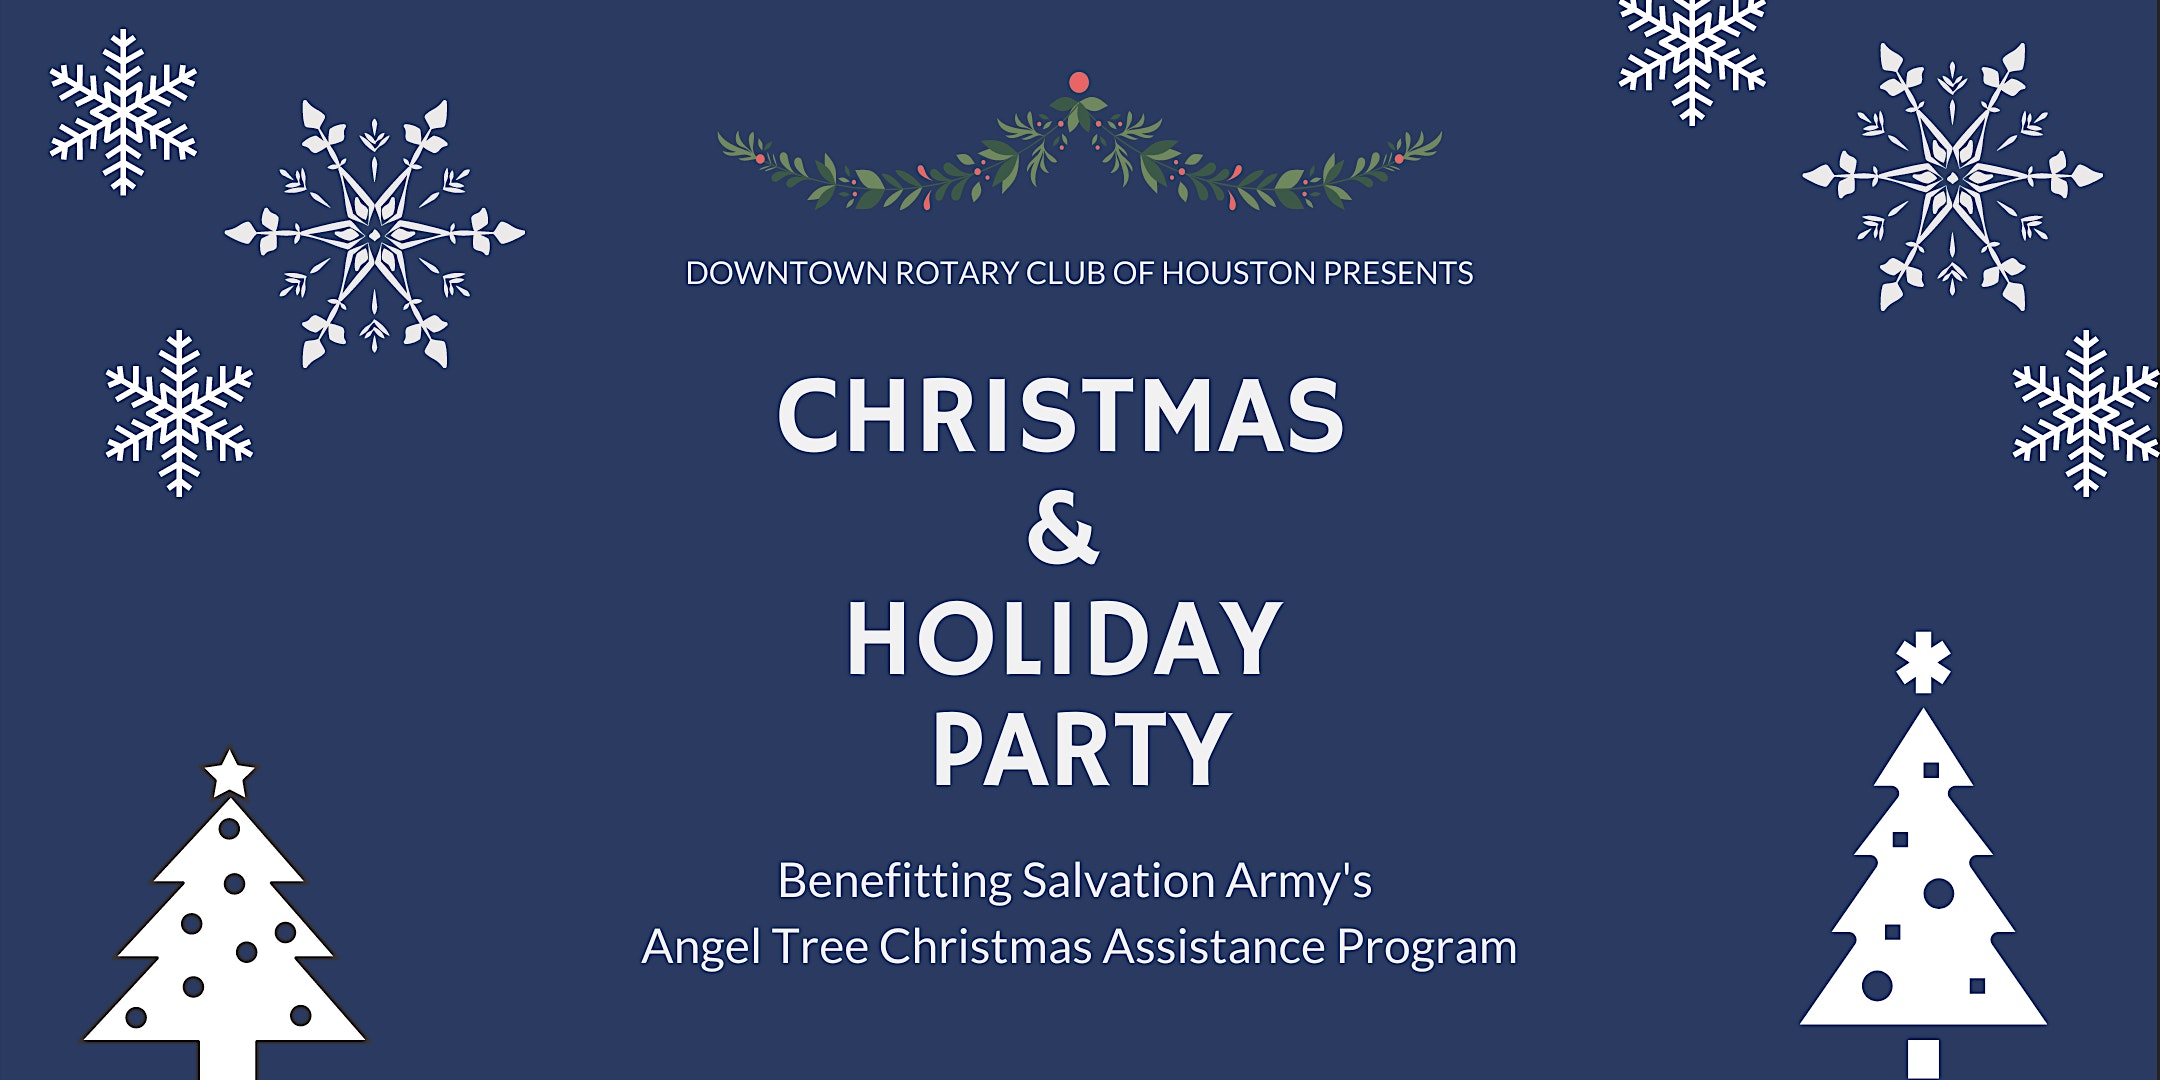 Downtown Rotary Christmas and Holiday Party Benefiting the Salvation Army